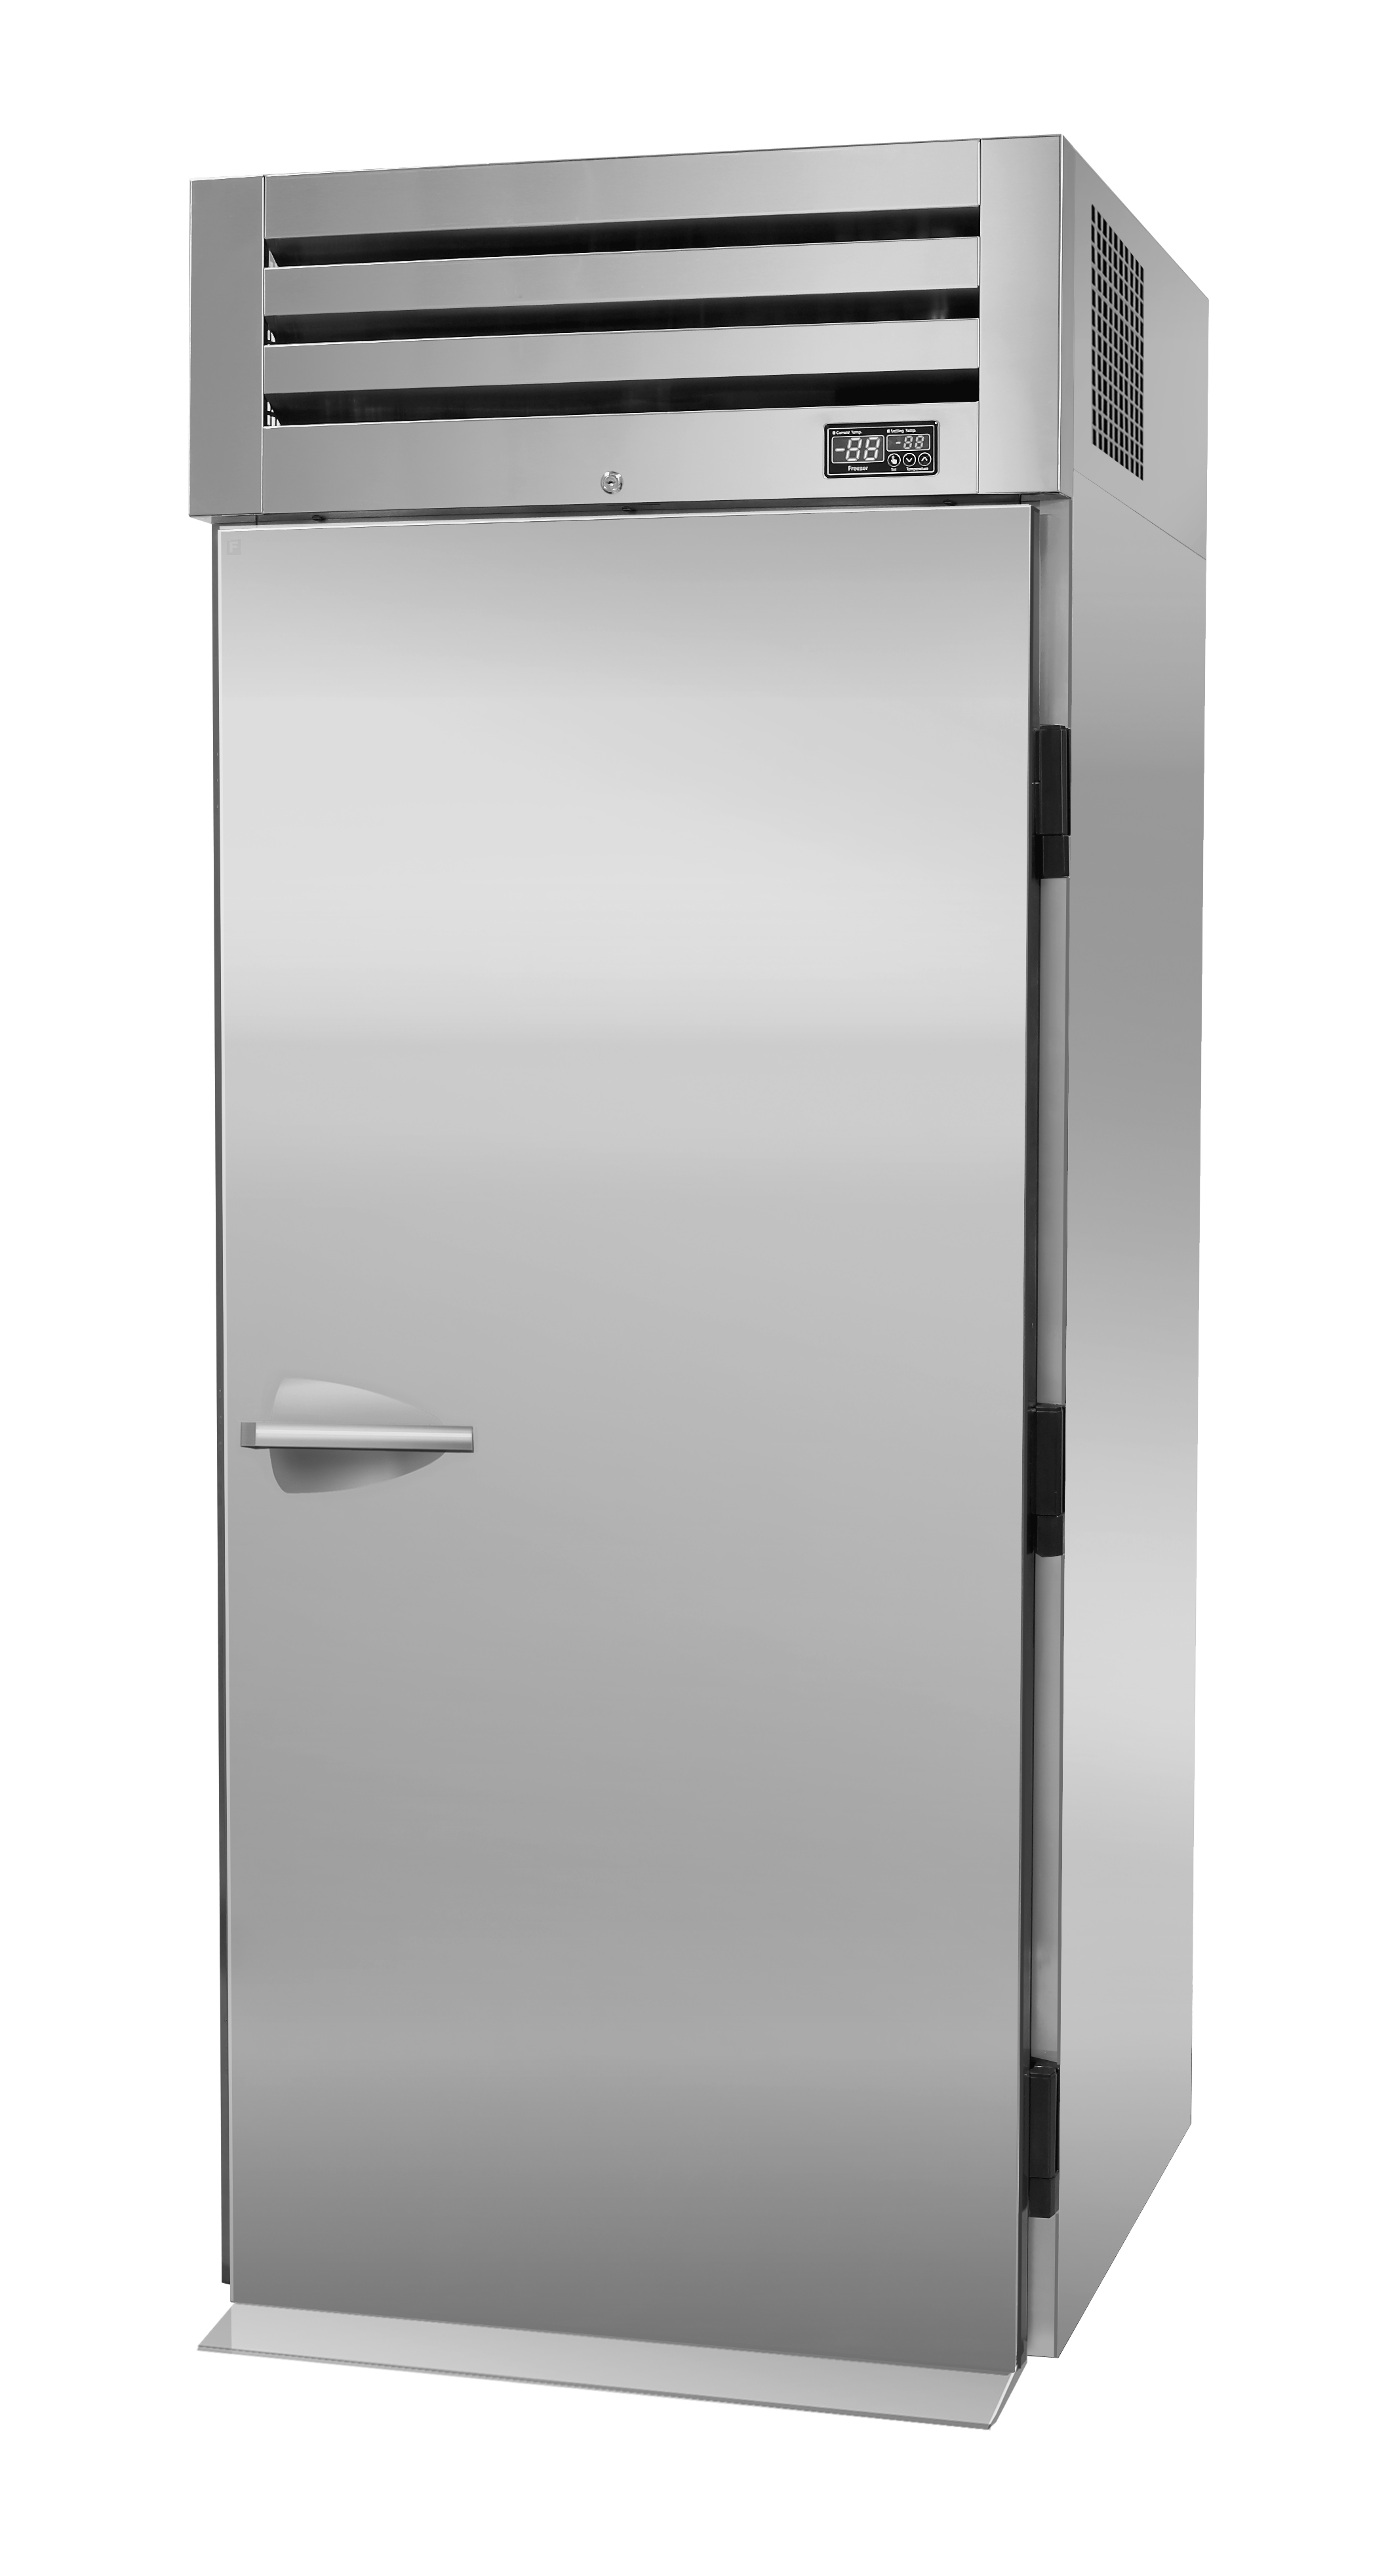 Premiere PRO Series Refrigerator, roll-in, one-section